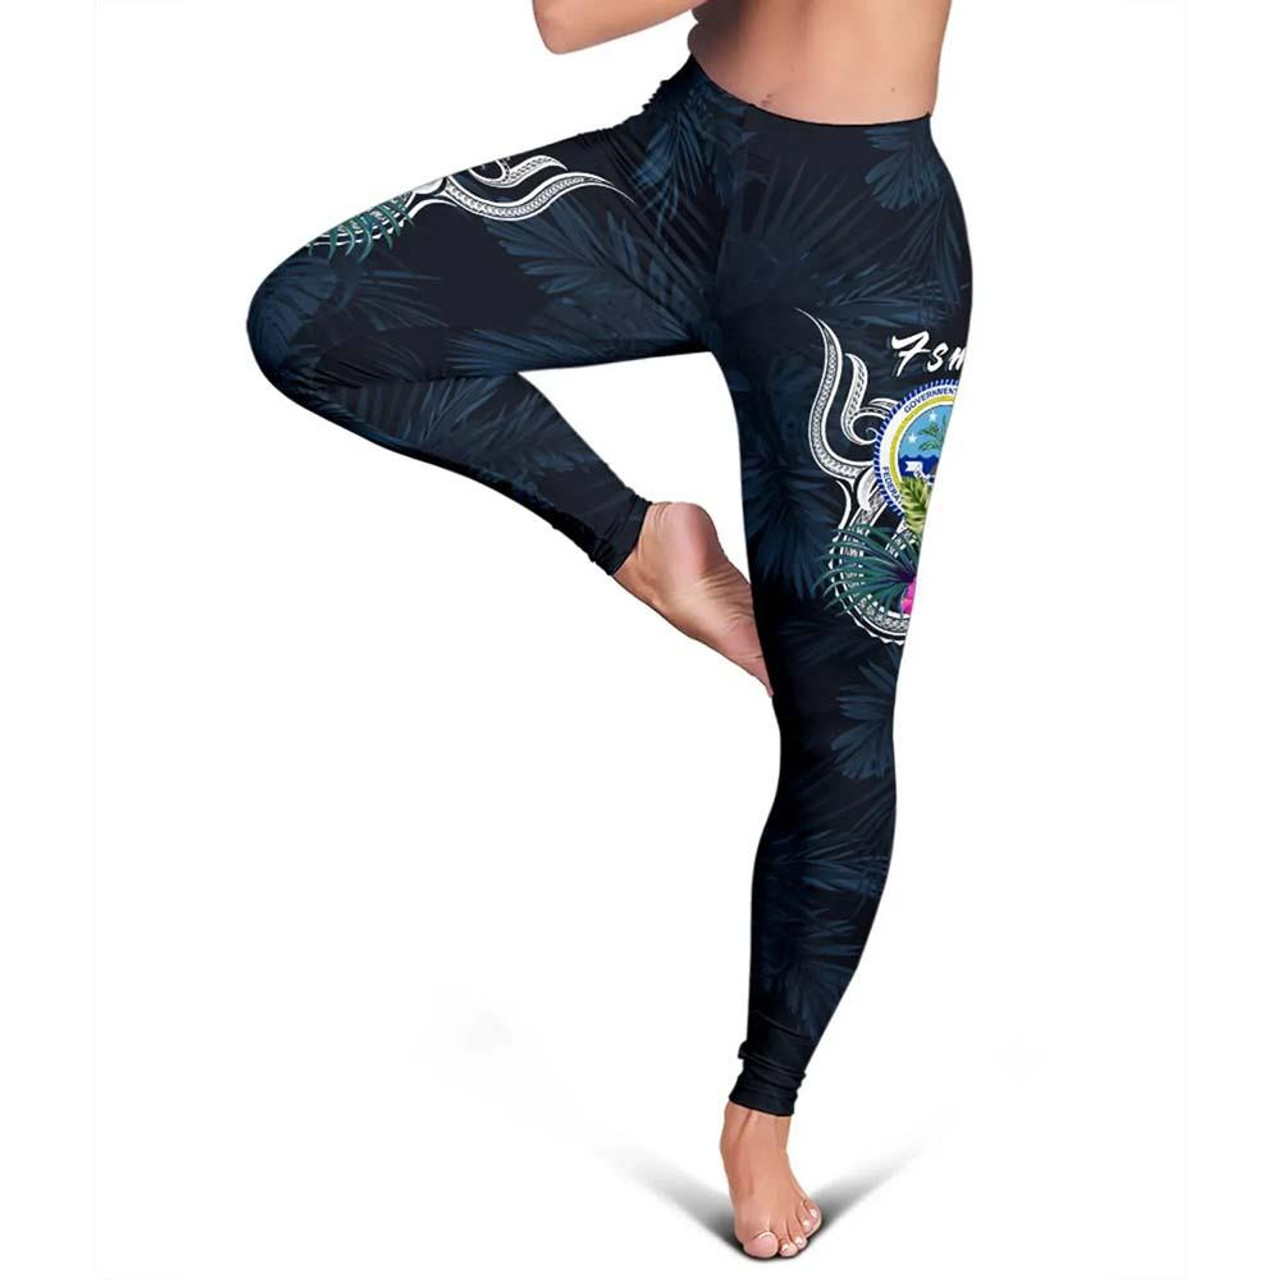 Federated States of Micronesia Legging - Tropical Flower 4